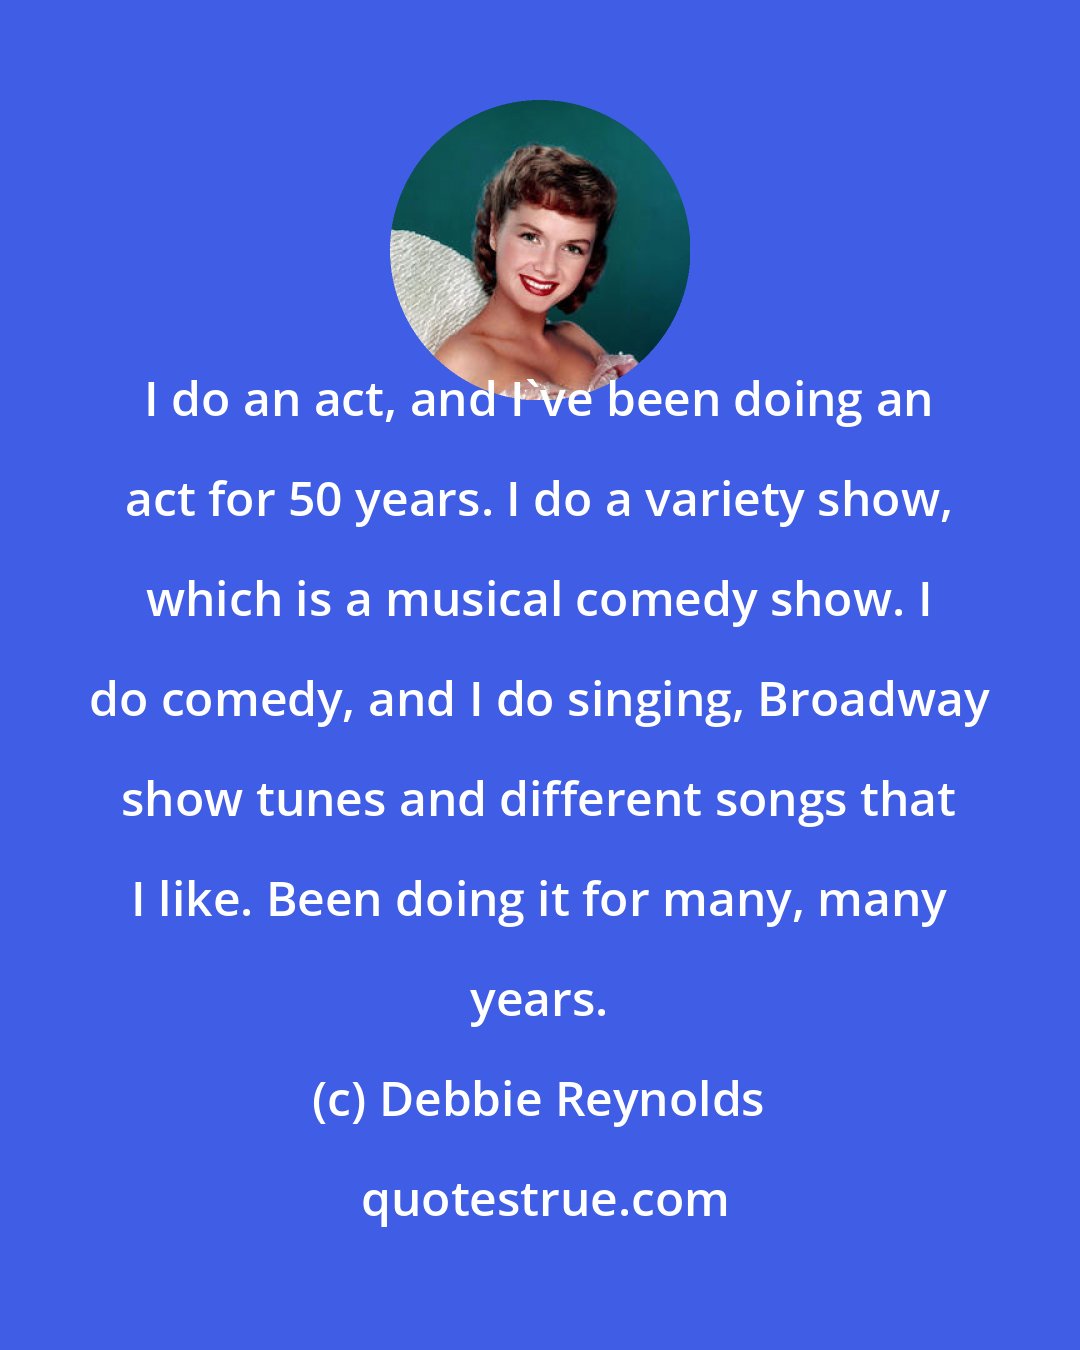 Debbie Reynolds: I do an act, and I've been doing an act for 50 years. I do a variety show, which is a musical comedy show. I do comedy, and I do singing, Broadway show tunes and different songs that I like. Been doing it for many, many years.